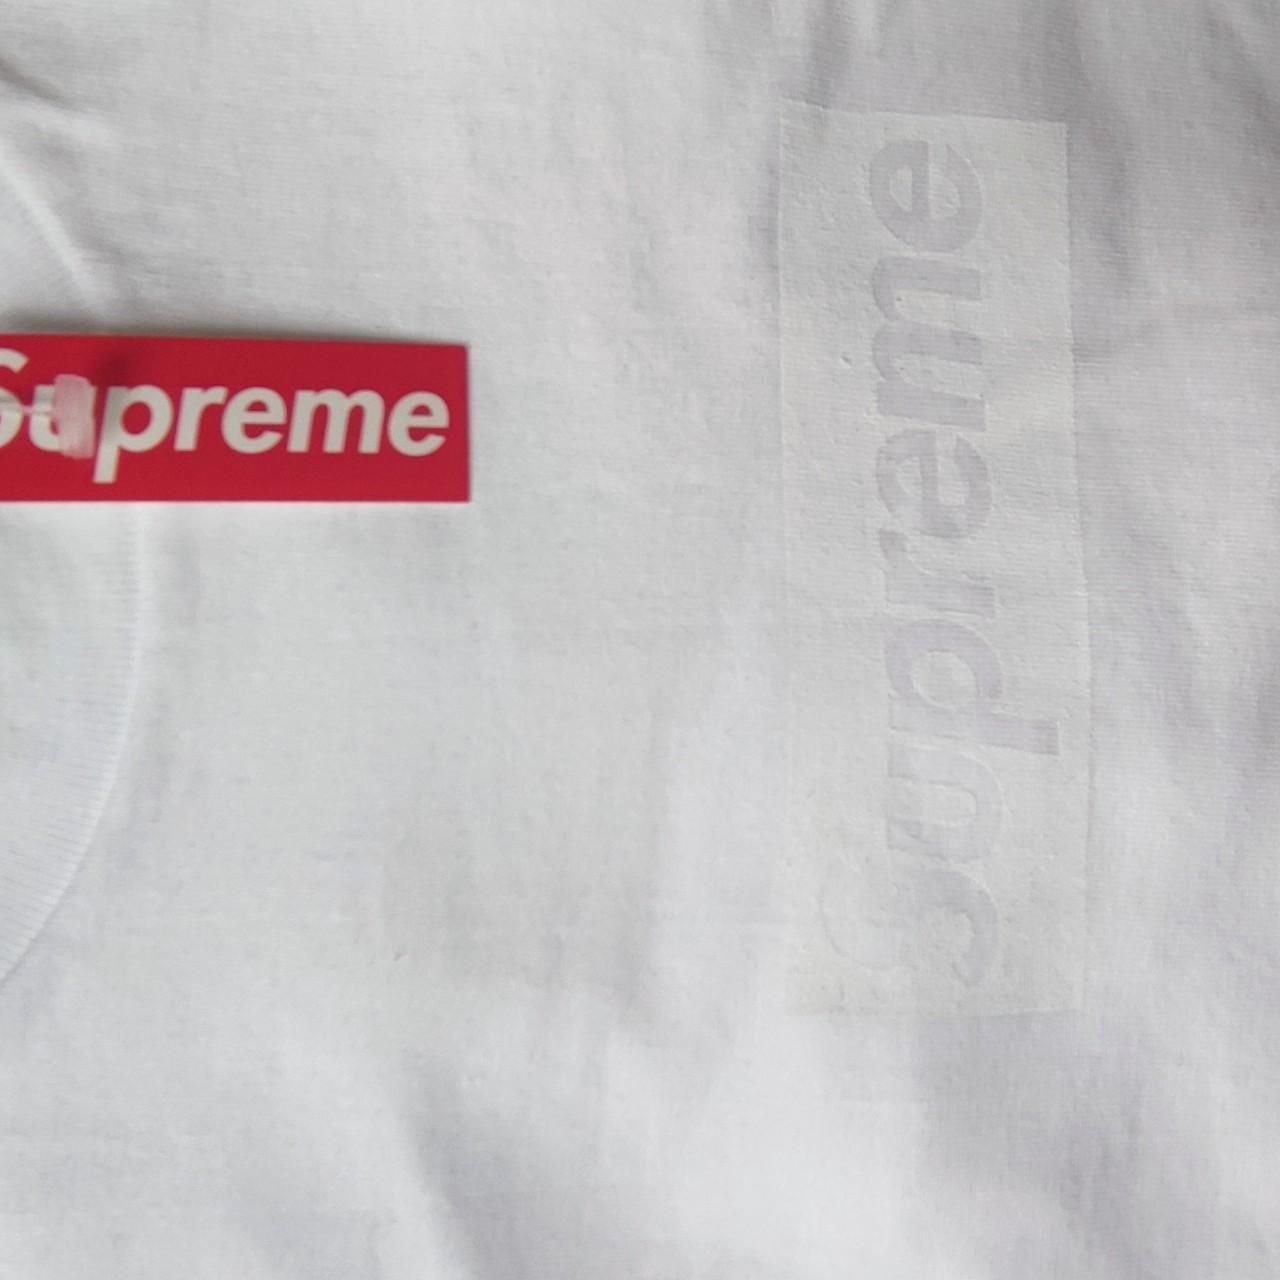 Supreme Men's White and Red T-shirt | Depop